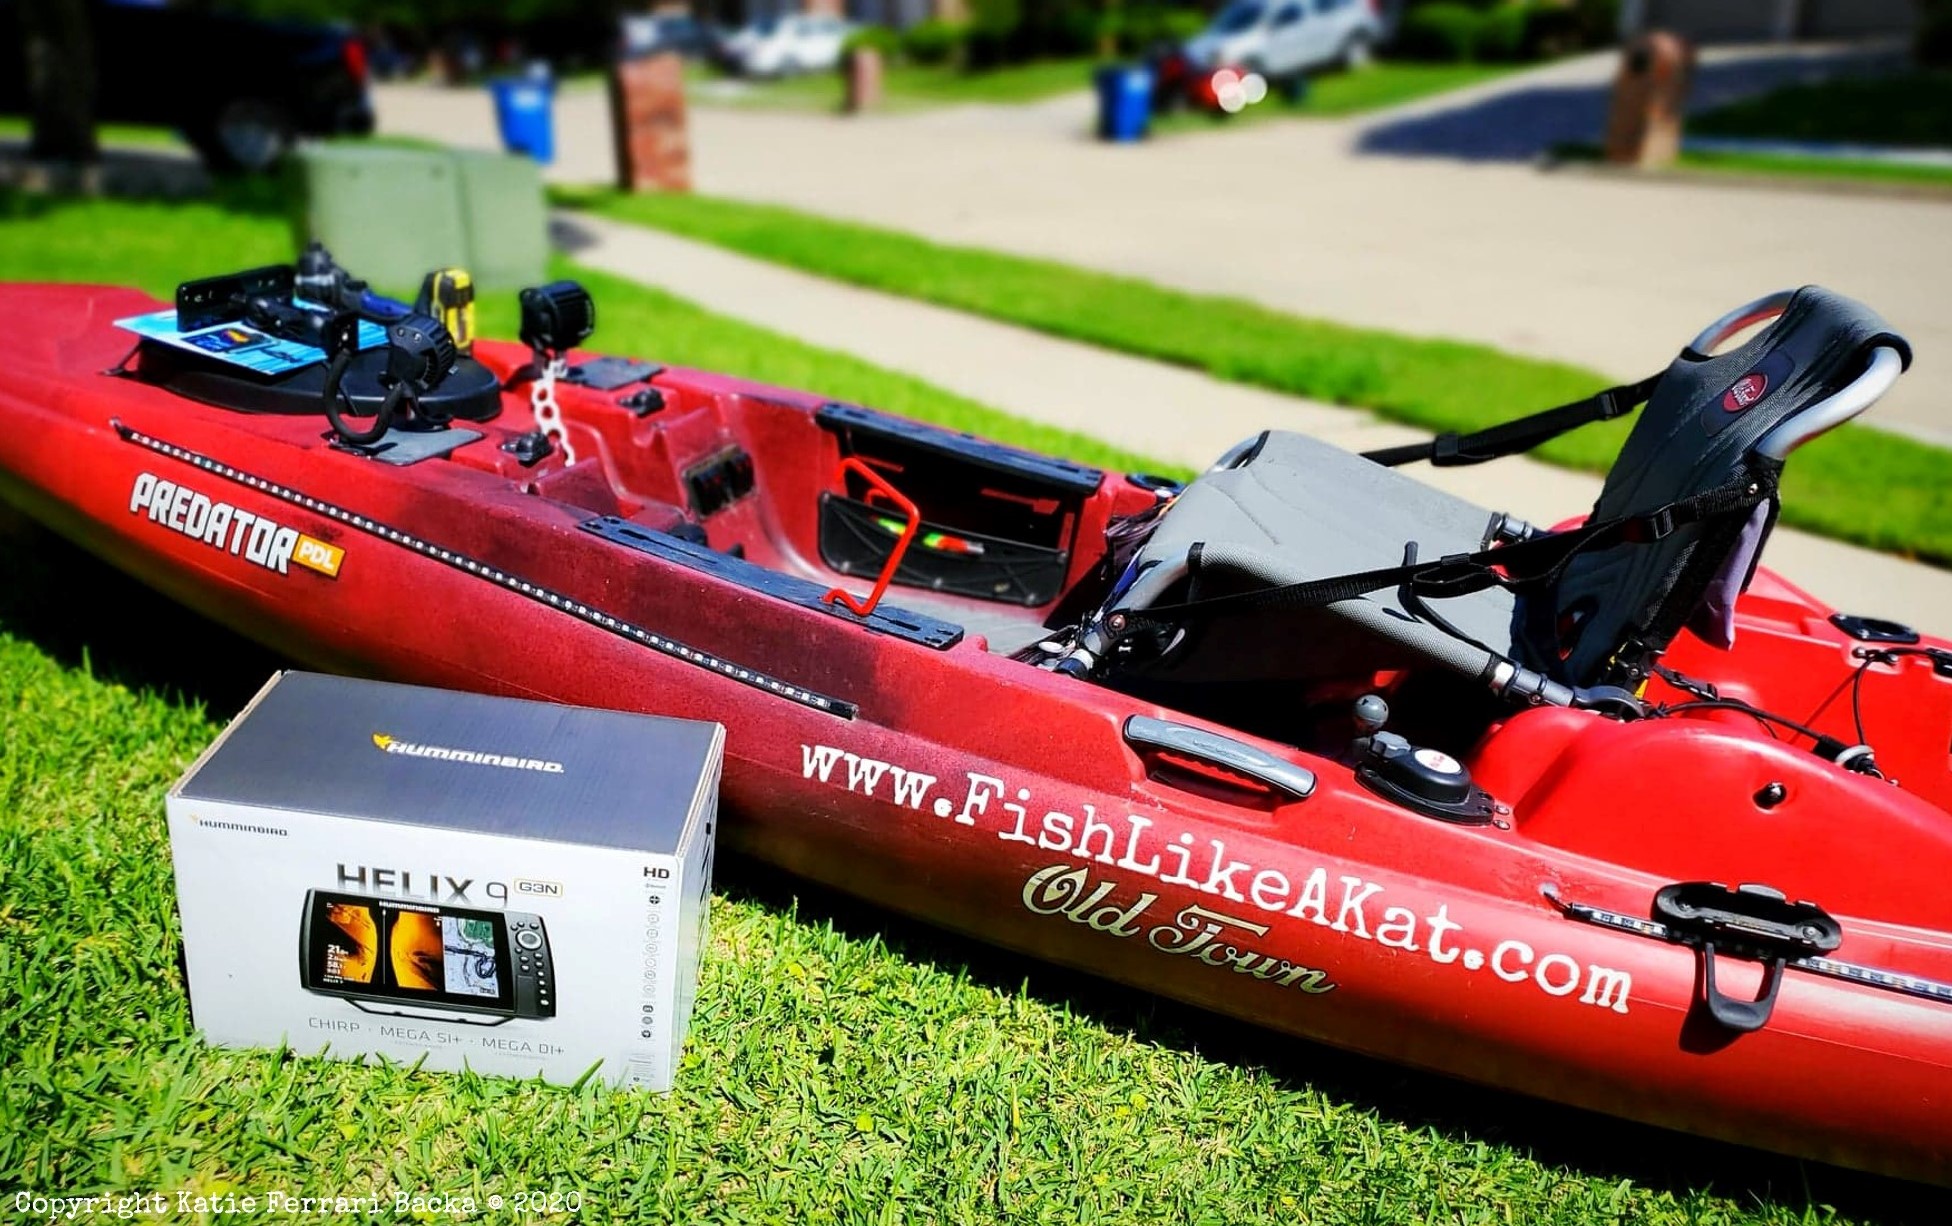 A red Old Town Predator PDL kayak with a Humminbird Helix 9 fish finder in front of it